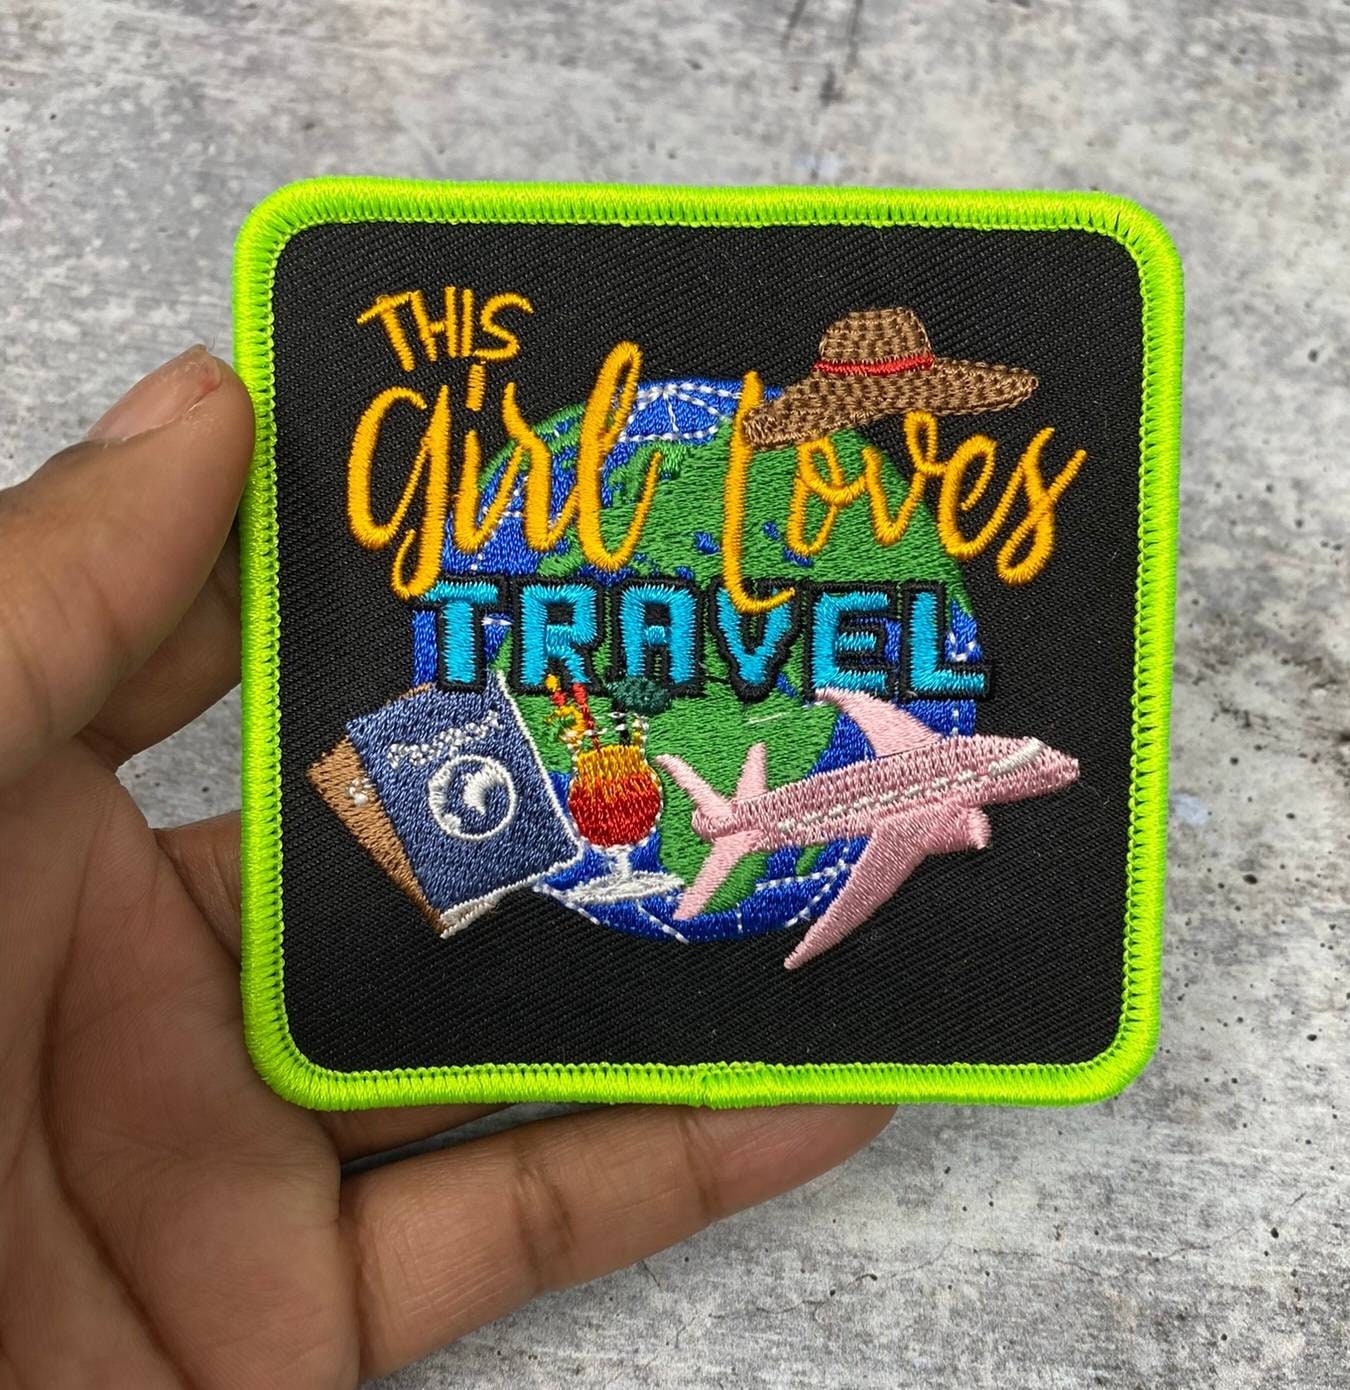 New "This Girl Loves Travel" Iron-on Patch, Size 3"x3" with Metallic Gold, Embroidered Patch for Jackets, Hats, & Crocs, Small Patch